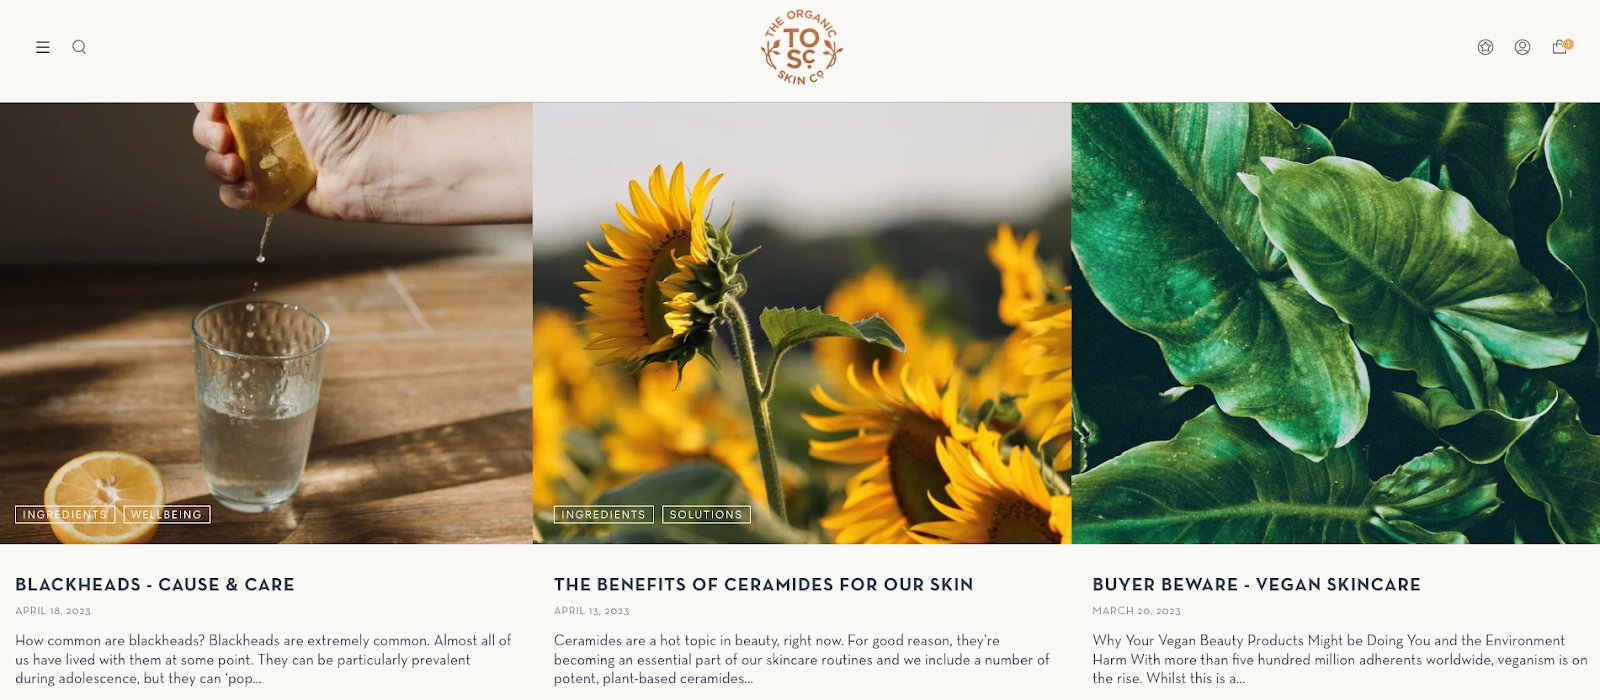 A look at The Organic Skin Co.’s blog